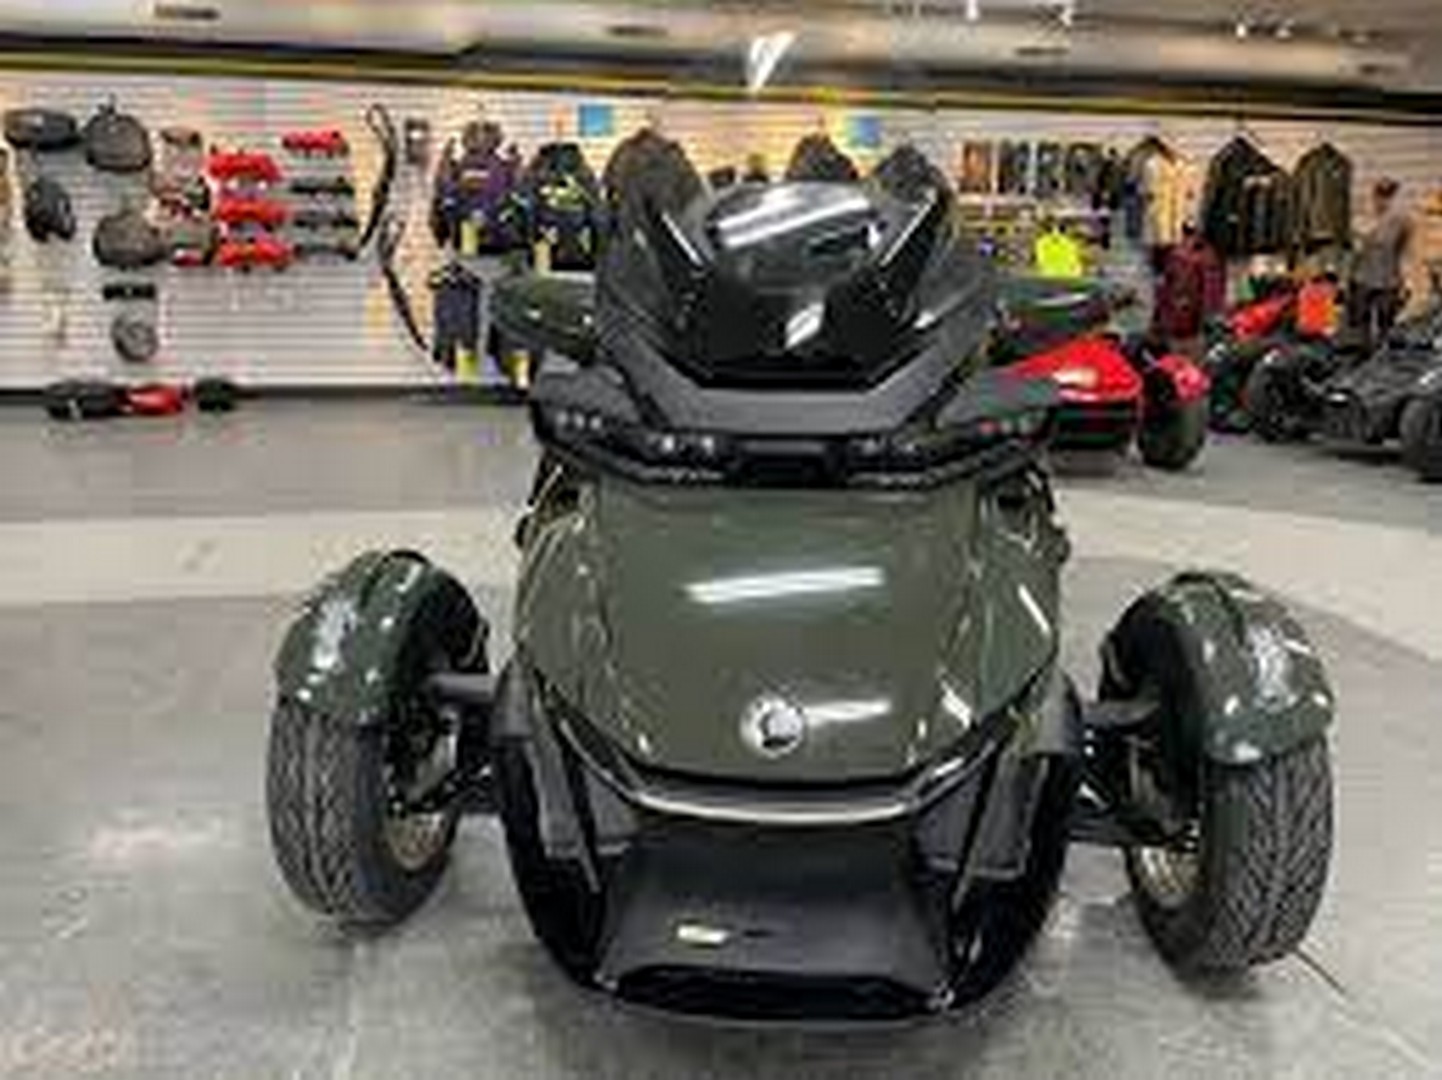 2023 Can-Am Spyder RT - 3-wheel touring motorcycle